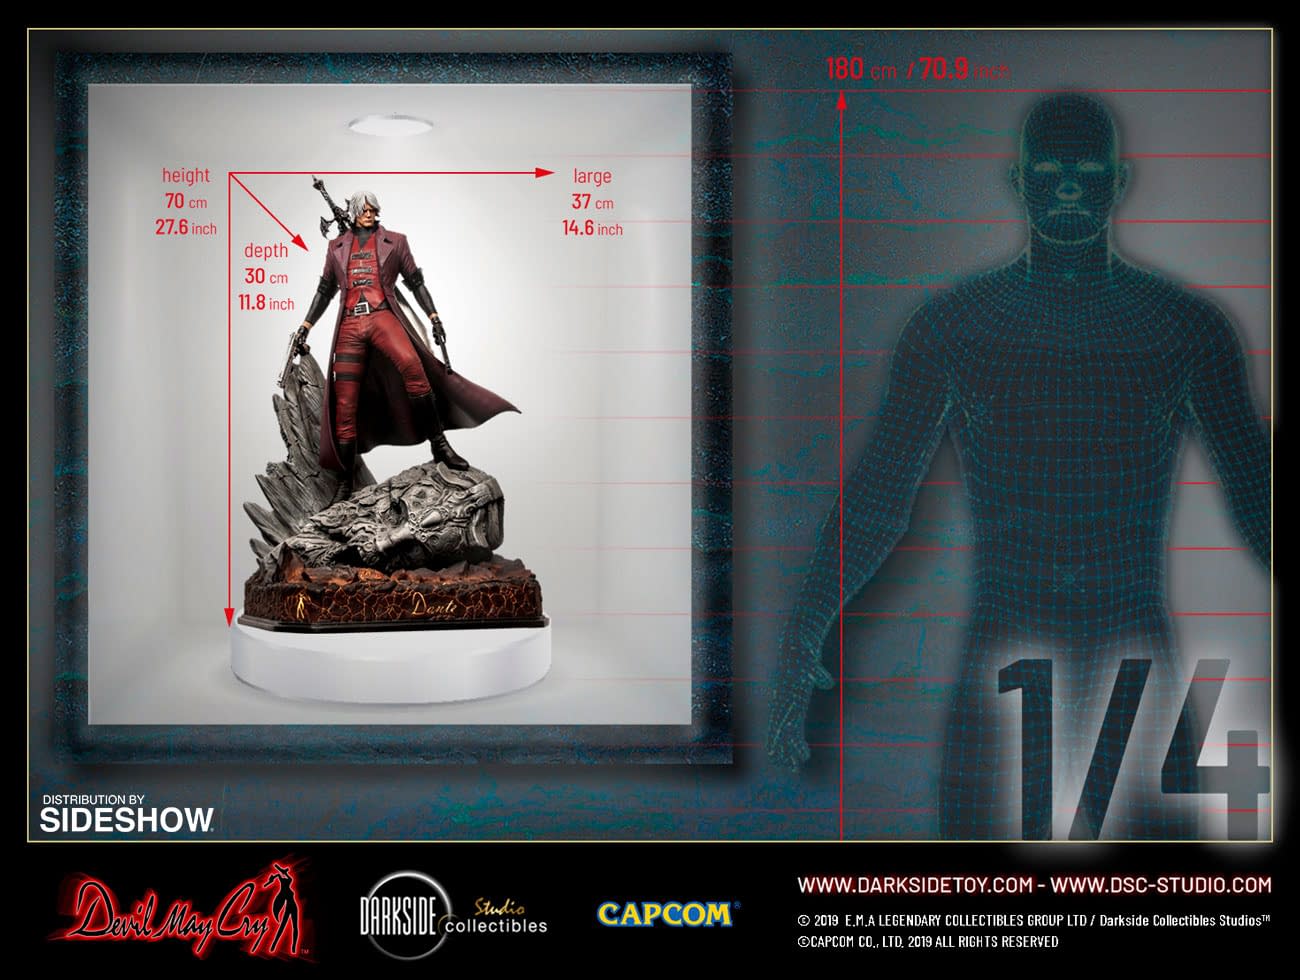 Devil May Cry: Dante Devil May Cry 1 Premium Statue by Darkside